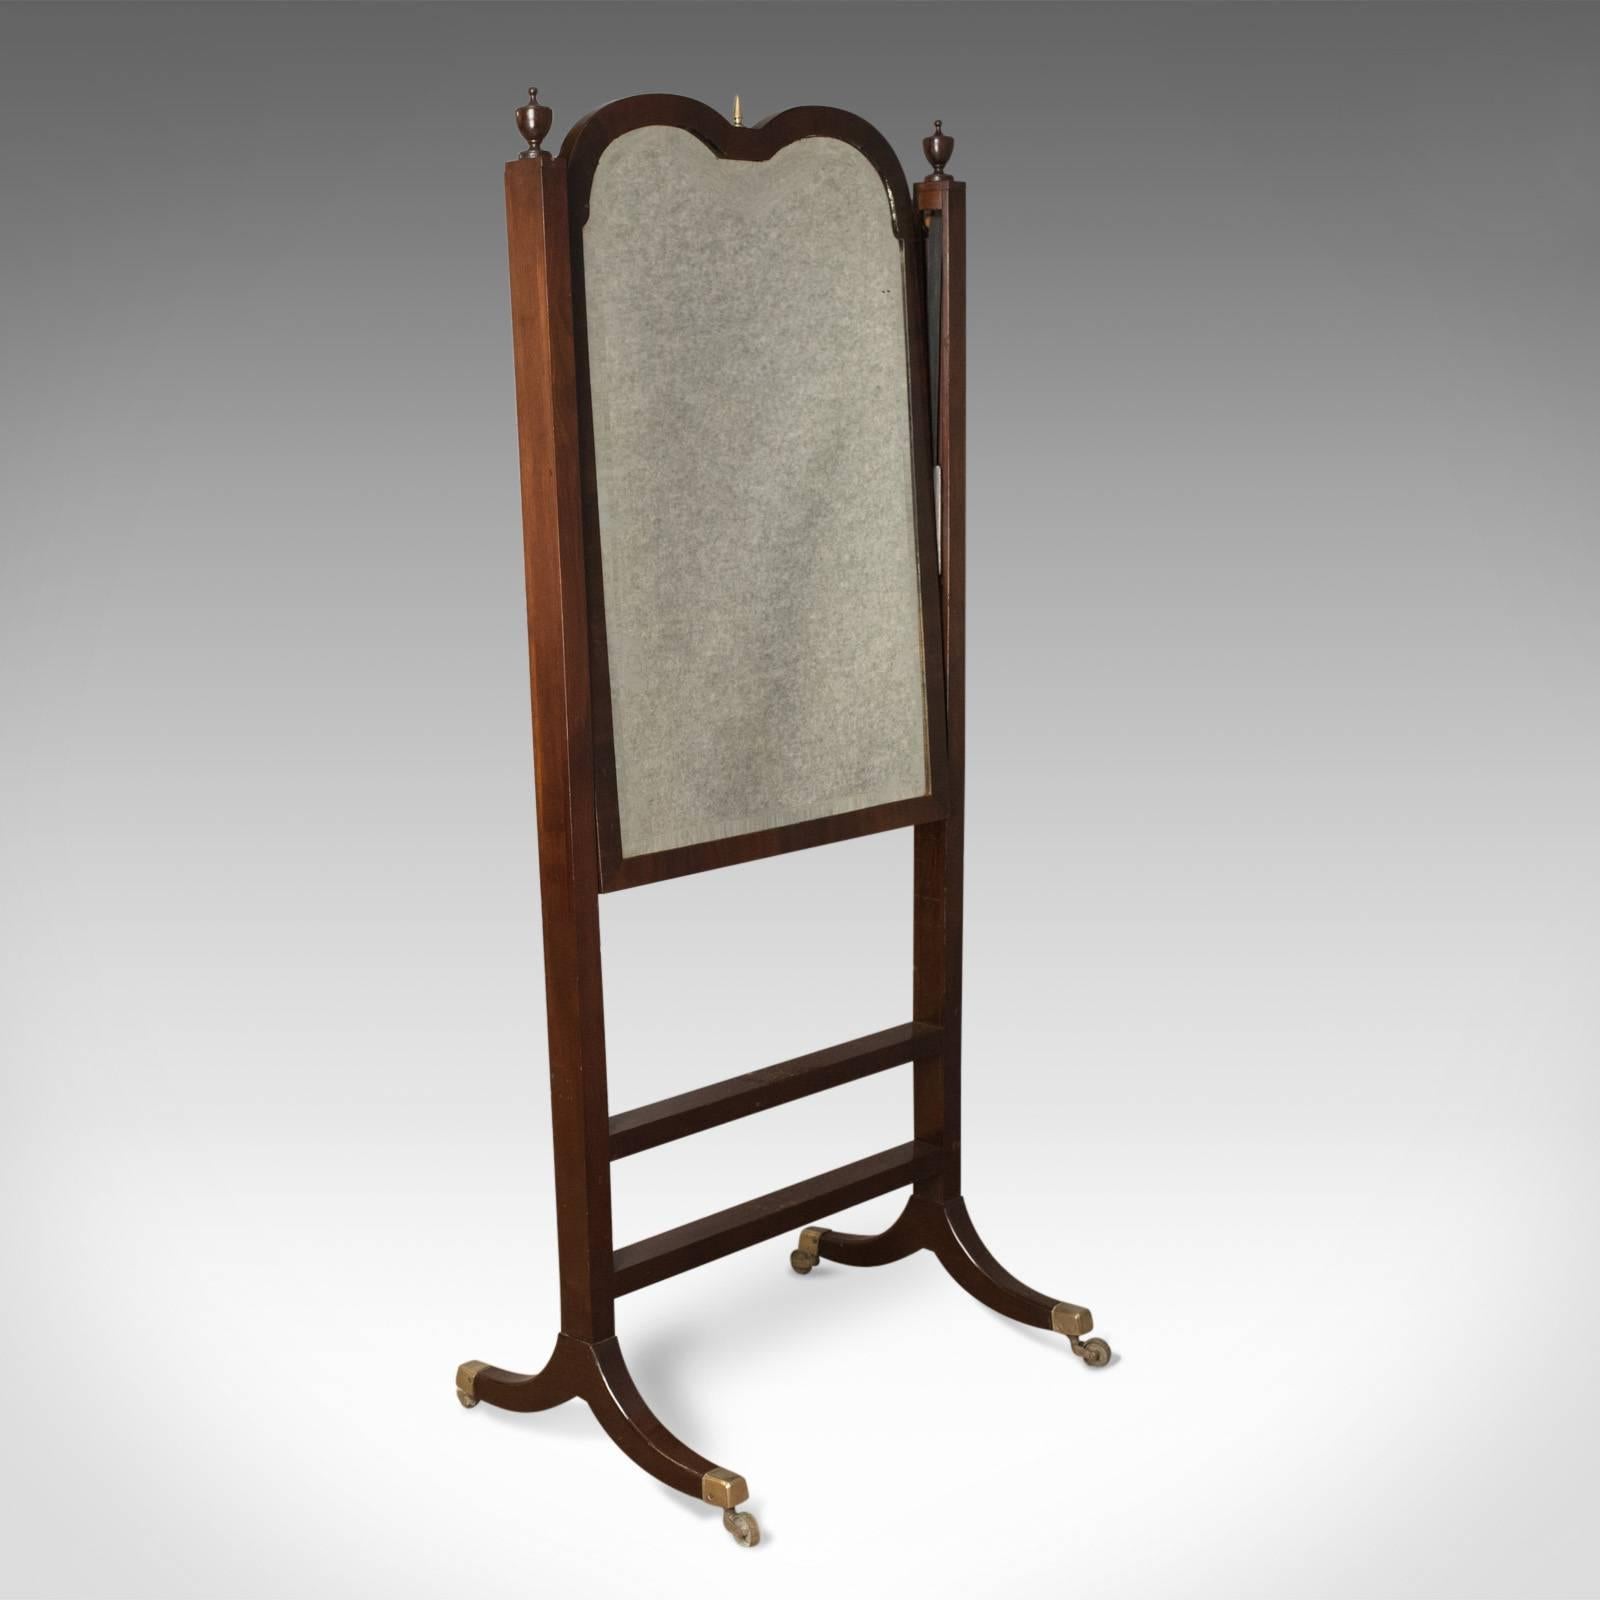 This is an antique cheval mirror, an English, Regency, tilting dressing mirror in mahogany stand dating to circa 1820.

Quality, heavy hand bevelled, shaped mirror plate
Mounted in humped mahogany frame
Topped with brass spire finial
Panelled